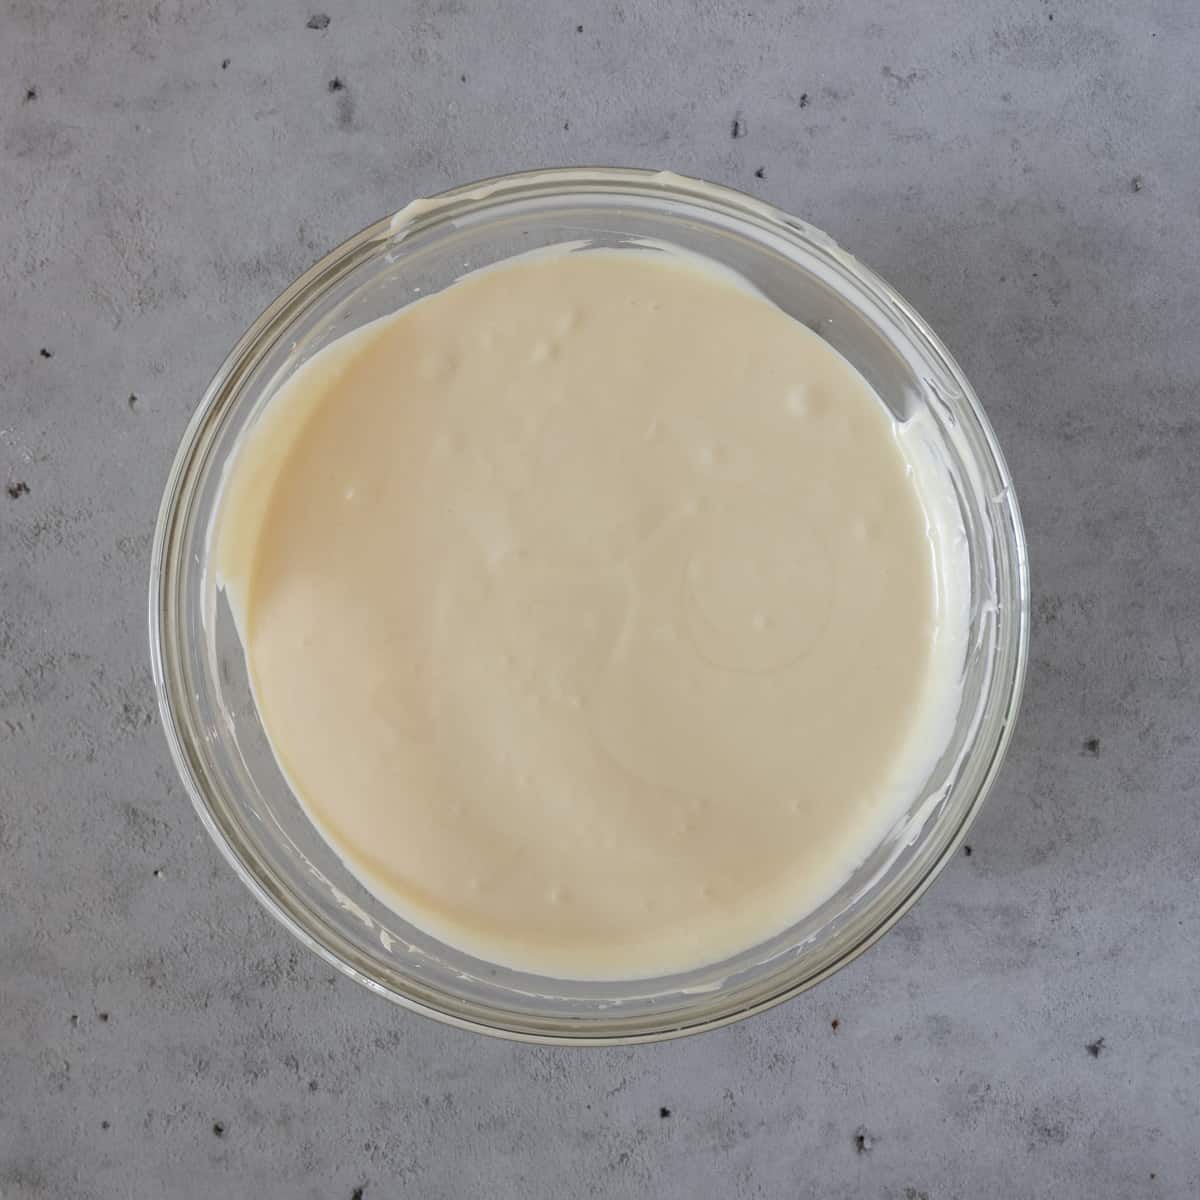 the completed cheesecake batter in a glass bowl on a grey background.